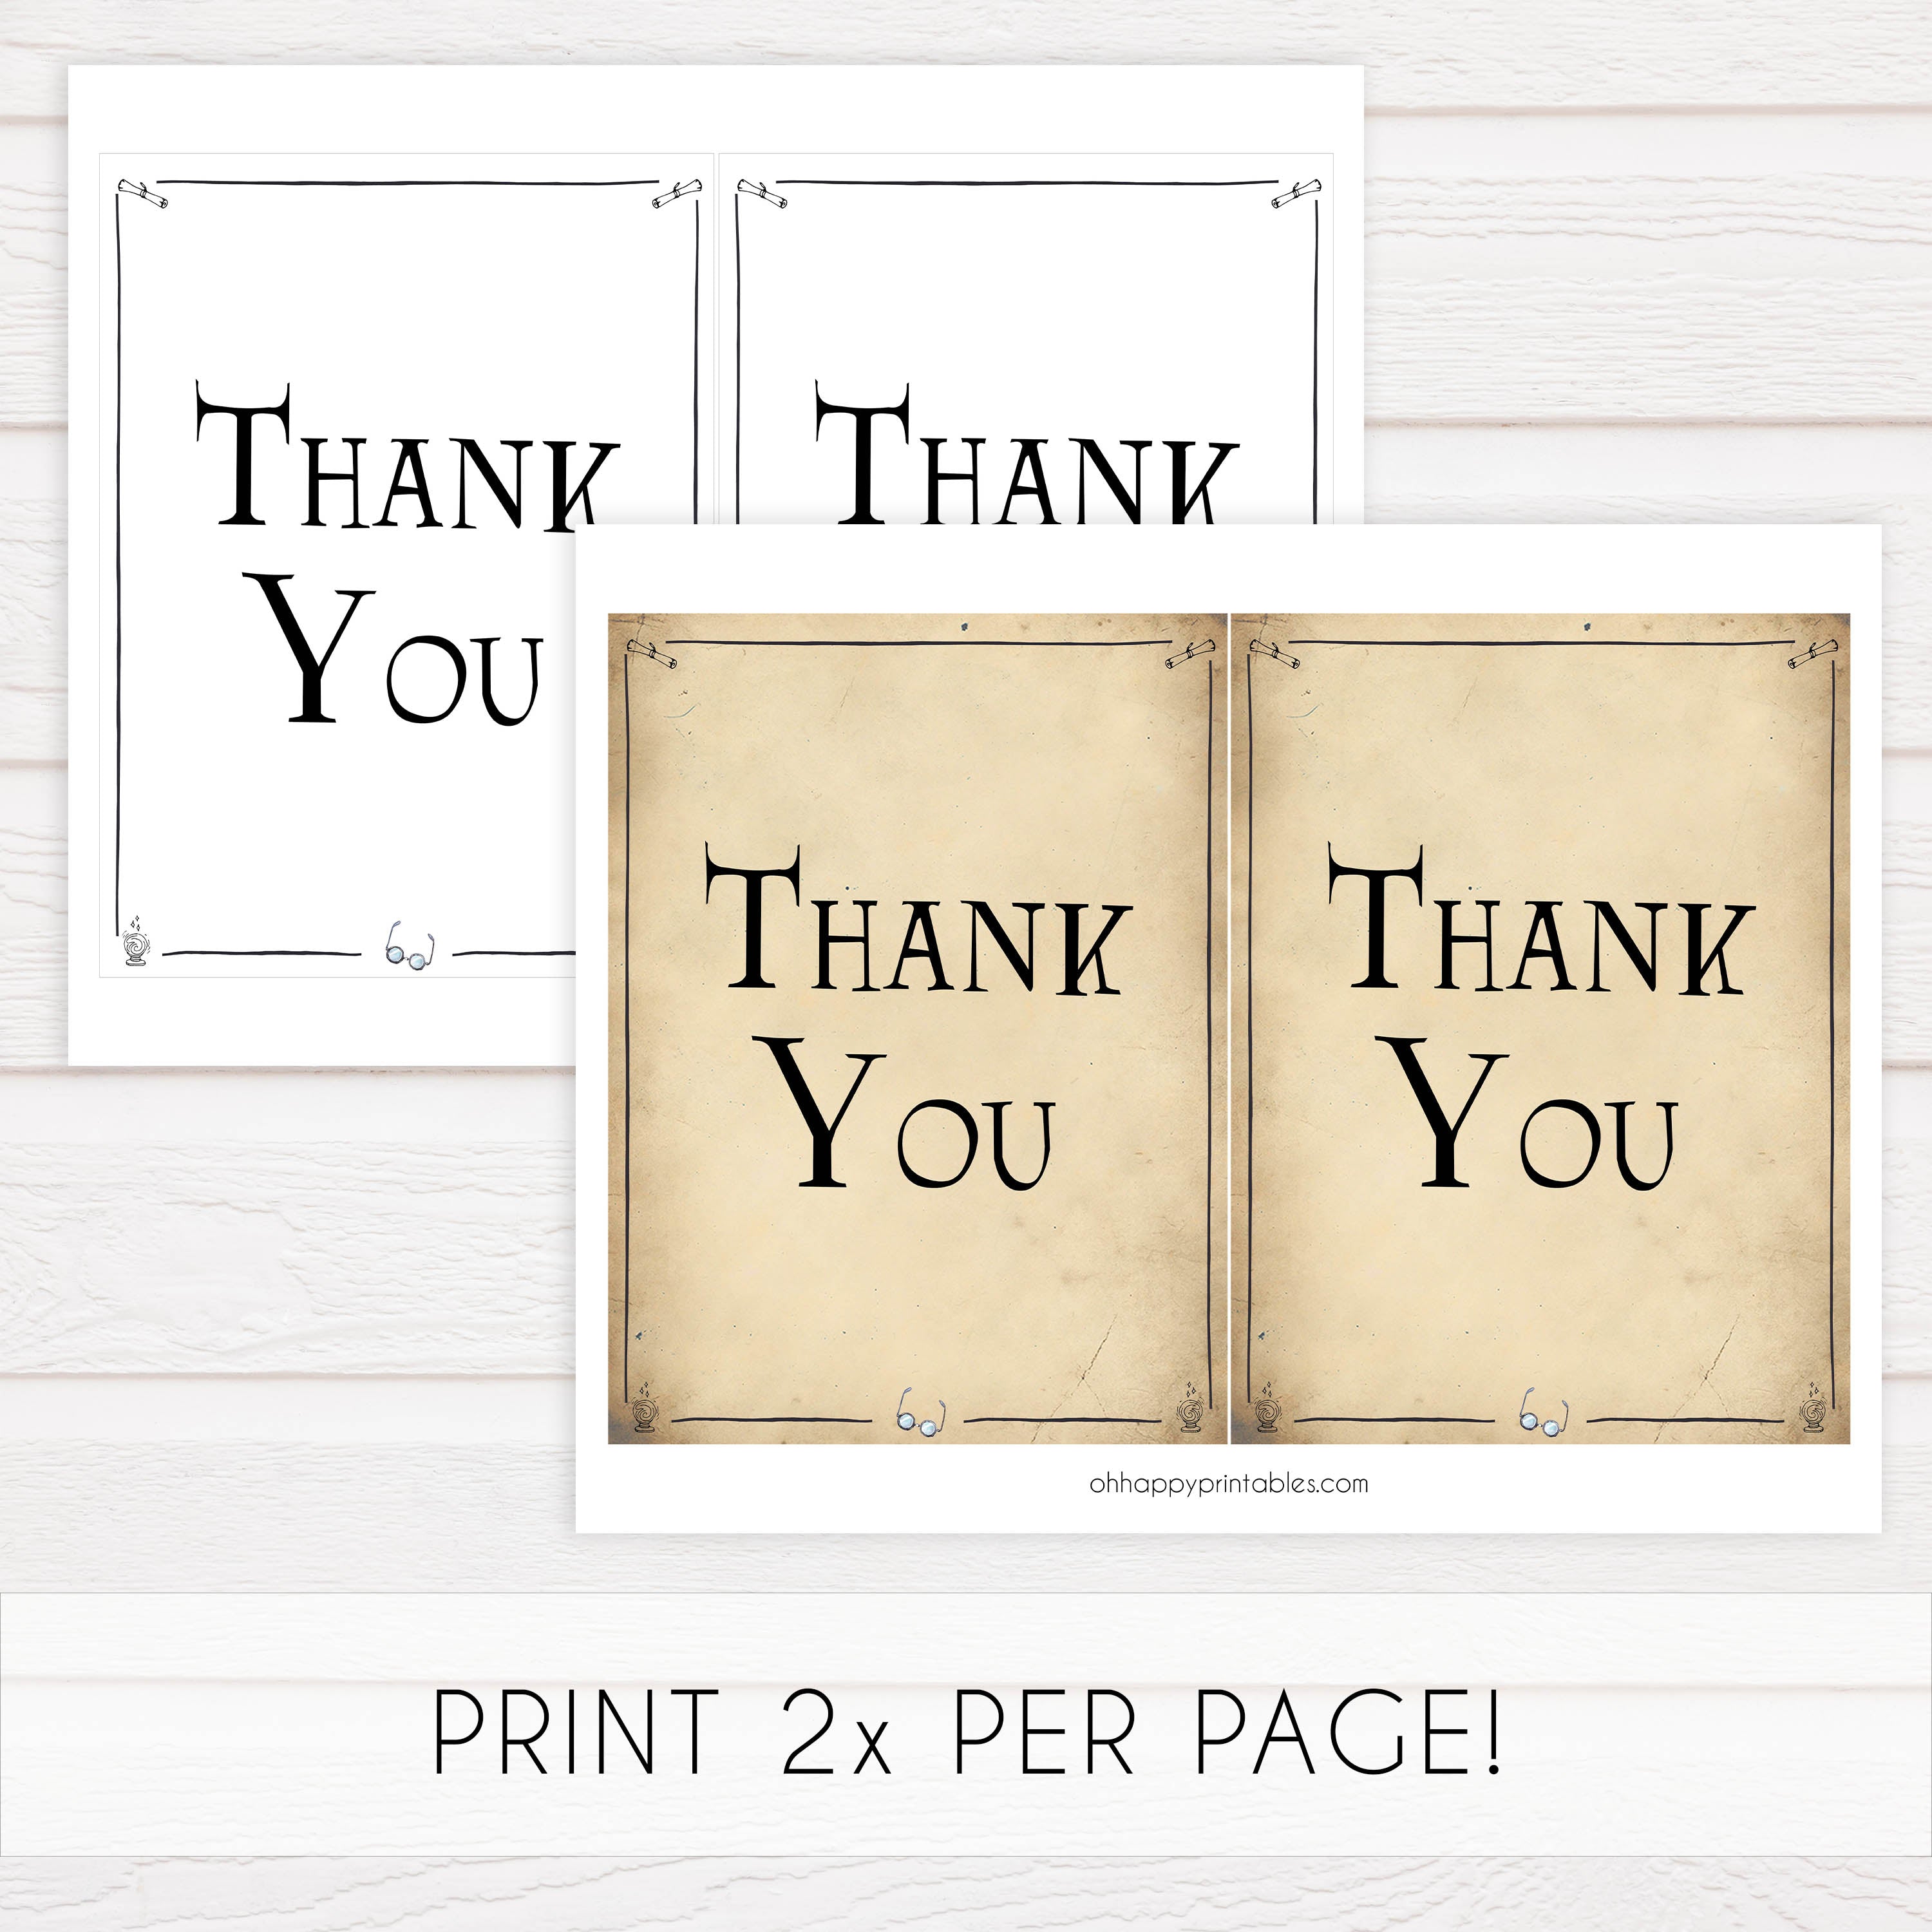 thank you sign, Printable bridal shower signs, Harry Potter bridal shower decor, Harry Potter bridal shower decor ideas, fun bridal shower decor, bridal shower game ideas, Harry Potter bridal shower ideas